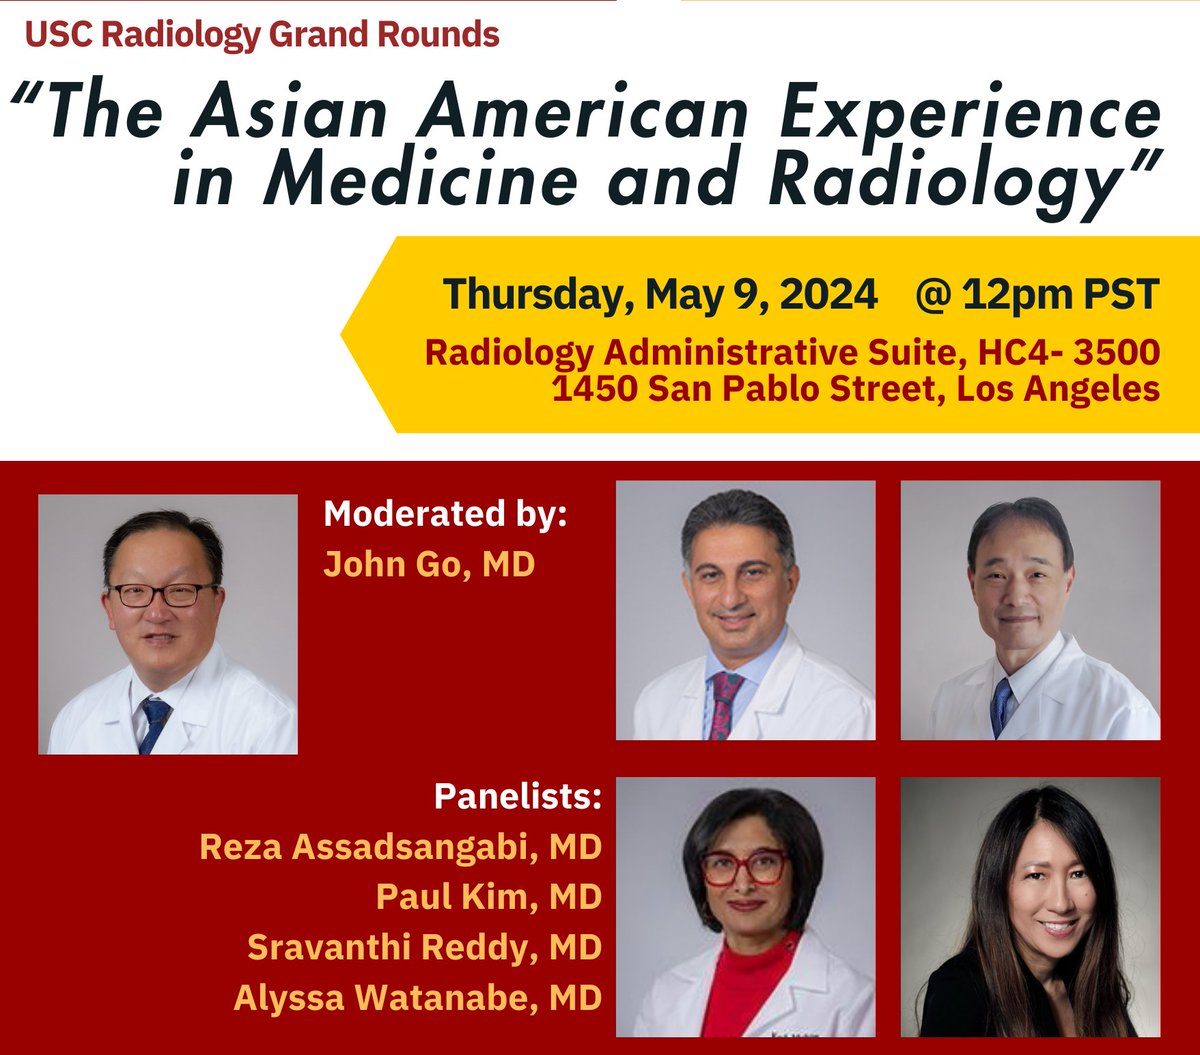 Save the Date: May 9 Radiology Grand Rounds 'The Asian American Experience in Medicine and Radiology' Moderator: Dr. John Go. Panelists: Drs. Reza Assadsangabi, Paul E. Kim, Sravanthi Reddy and Alyssa Watanabe. Zoom: usc.zoom.us/j/96929480359?… #Radiology #GrandRounds #AAPI